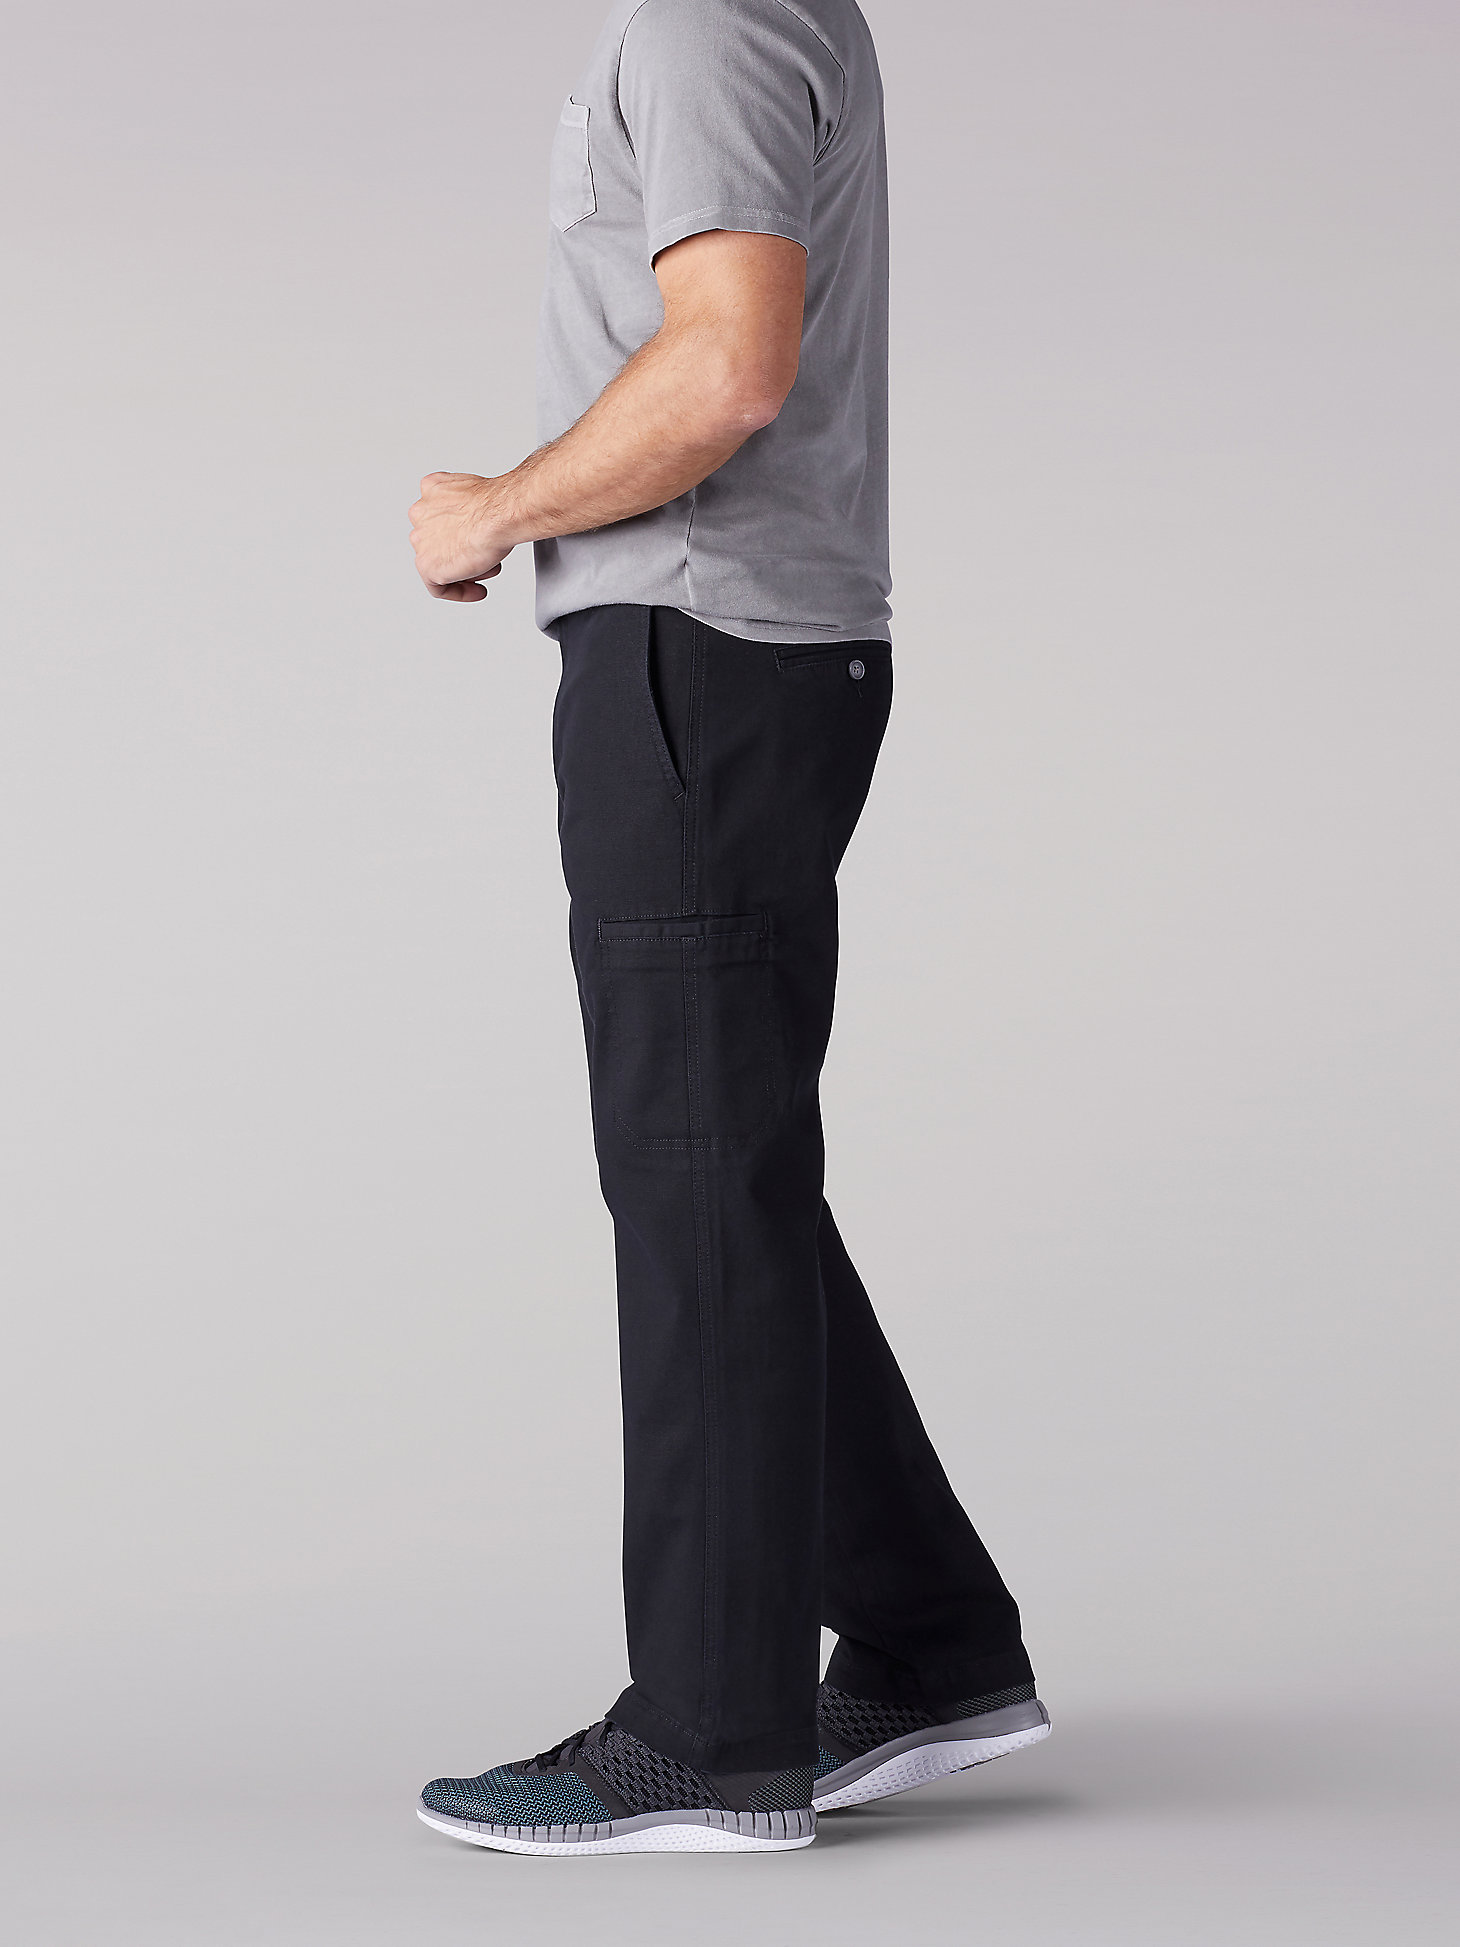 Men’s Extreme Comfort Straight Fit Cargo Pant (Big&Tall) in Black alternative view 2